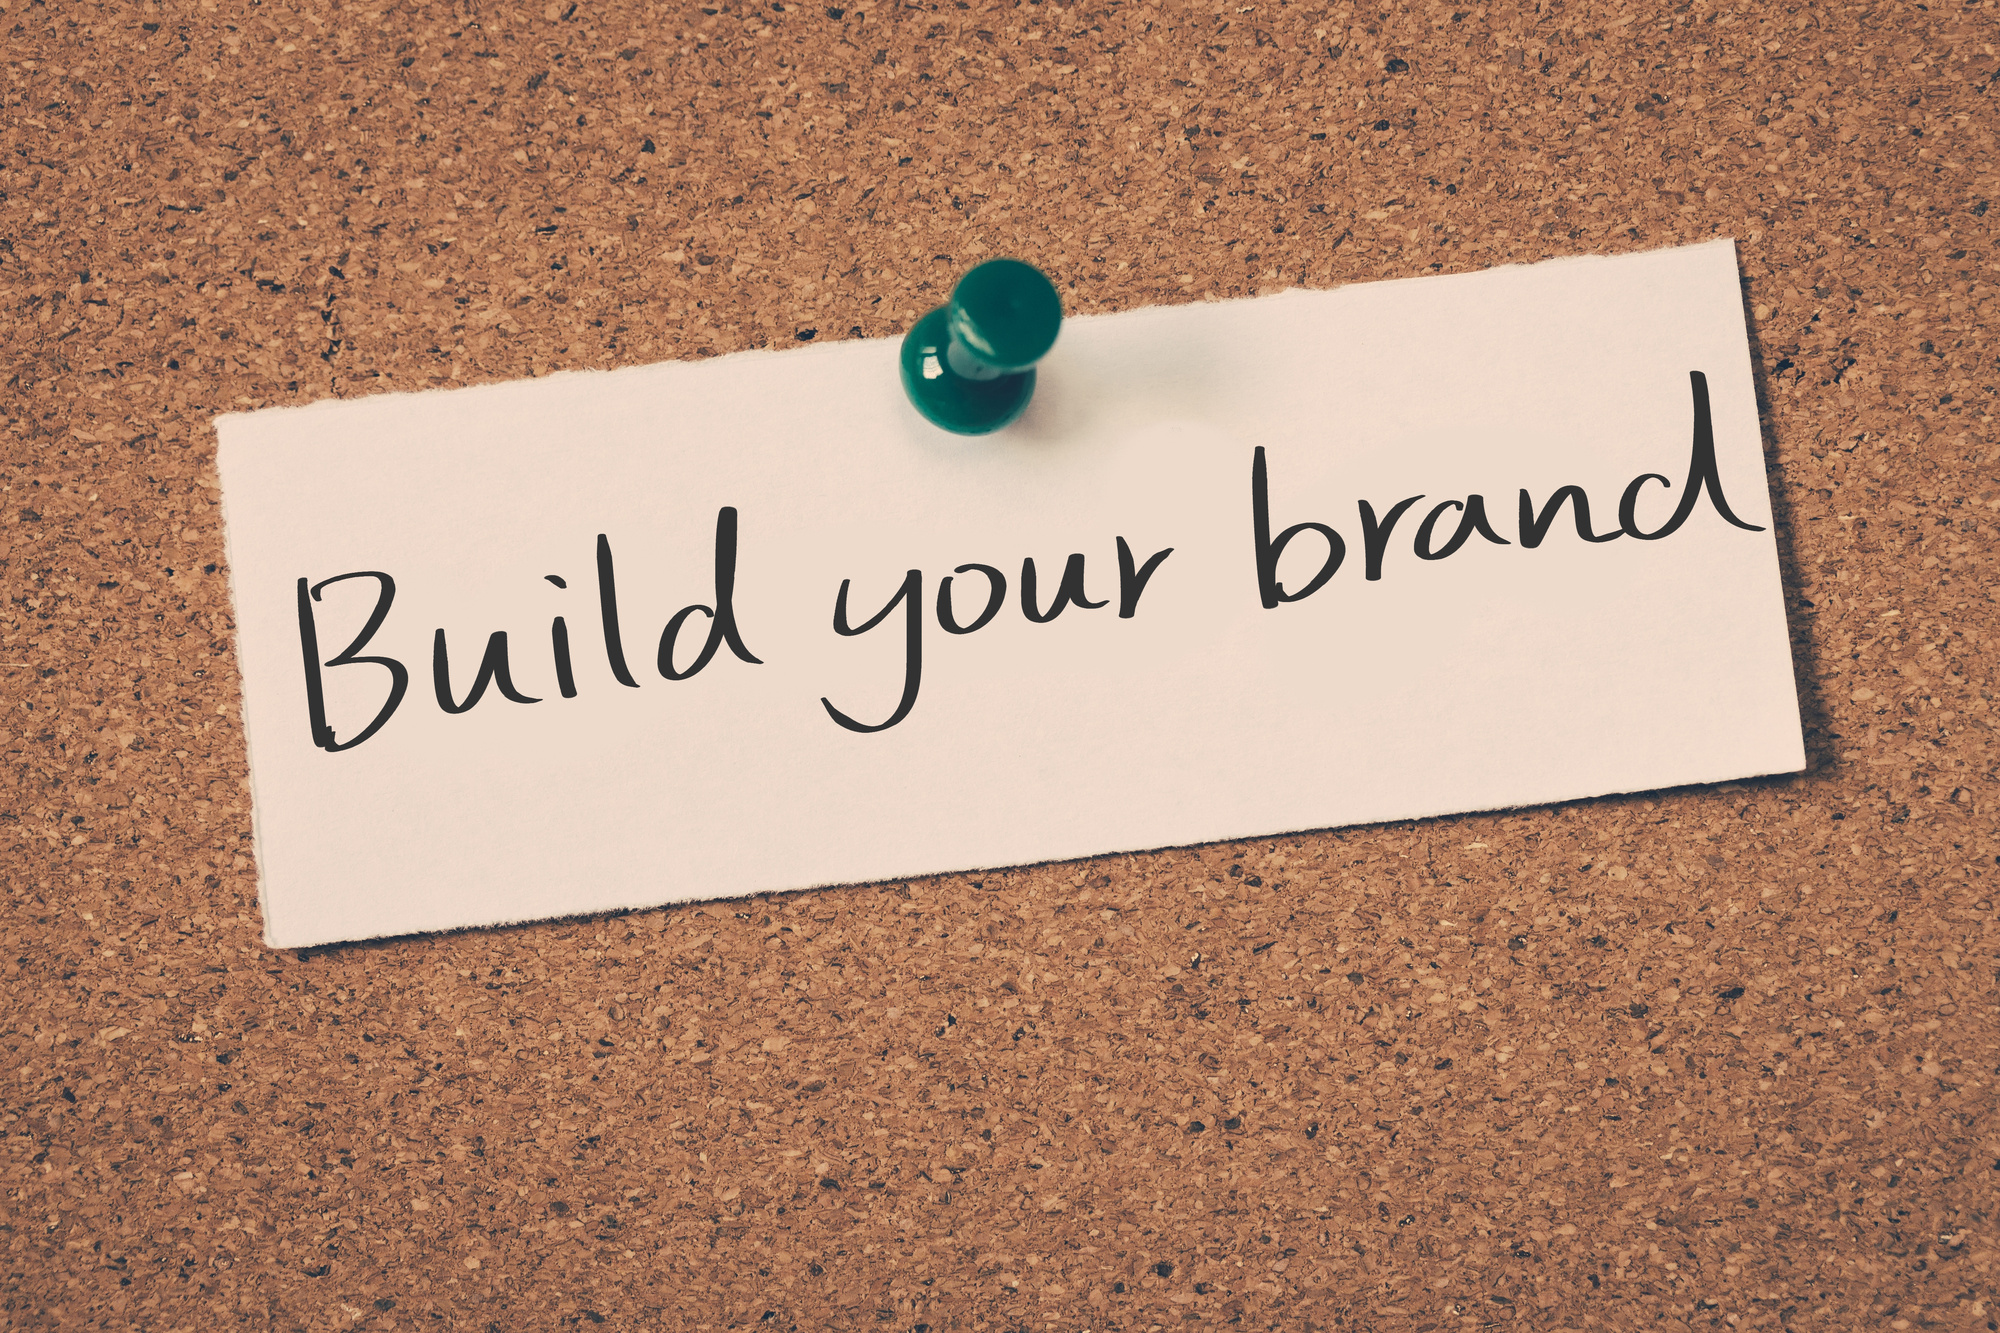 Finding the right professionals to help you create a brand requires knowing your options. Here is a guide to hiring a branding agency for businesses.